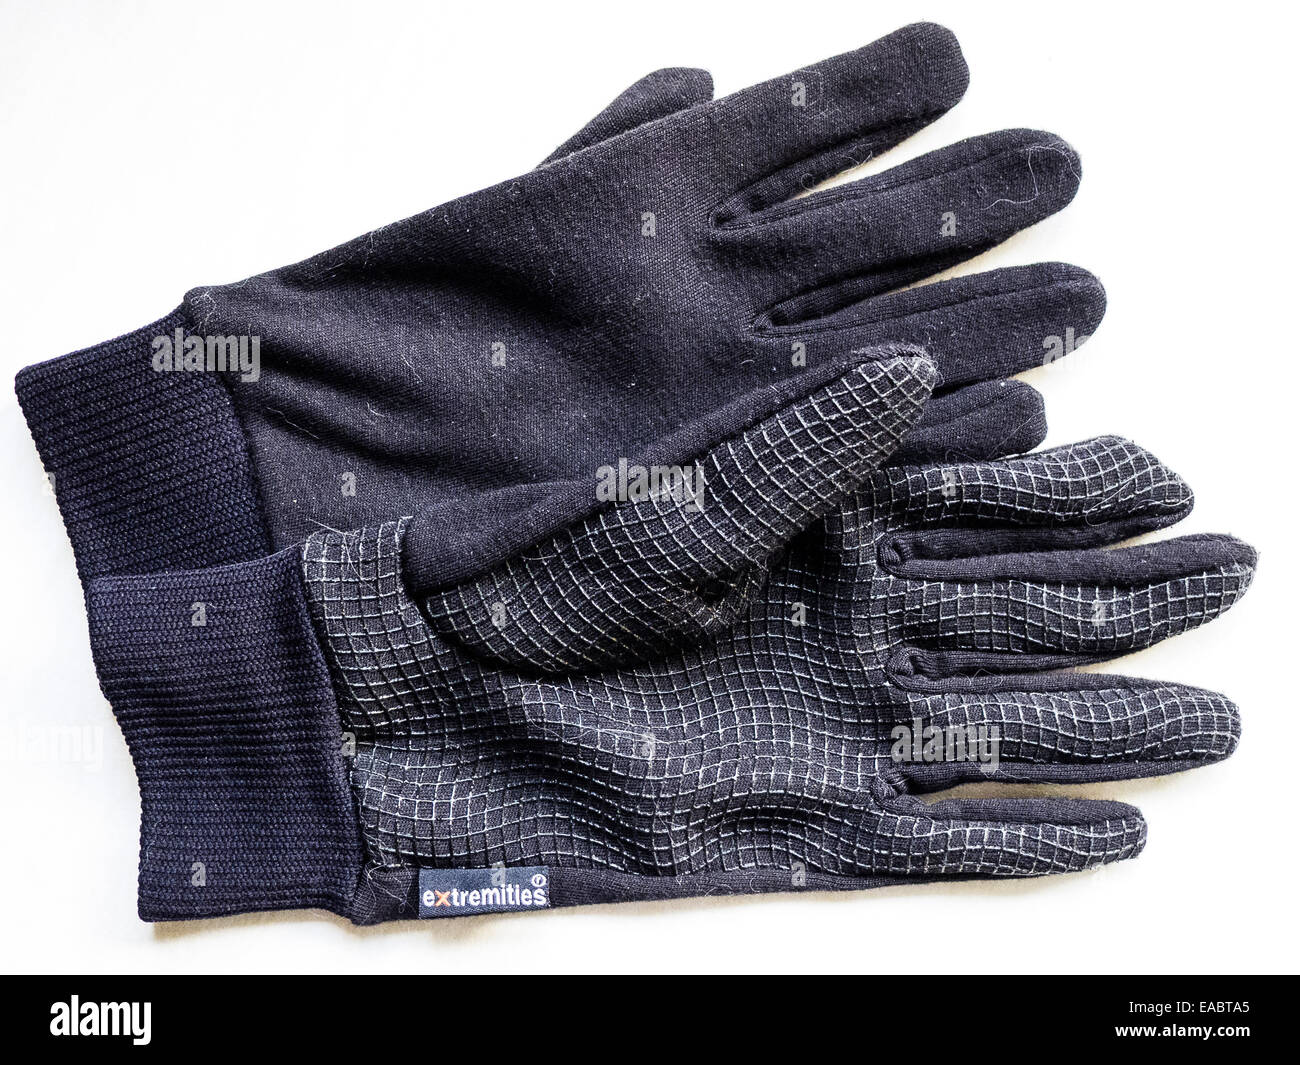 Extremities  gloves for sports use and photographers Stock Photo